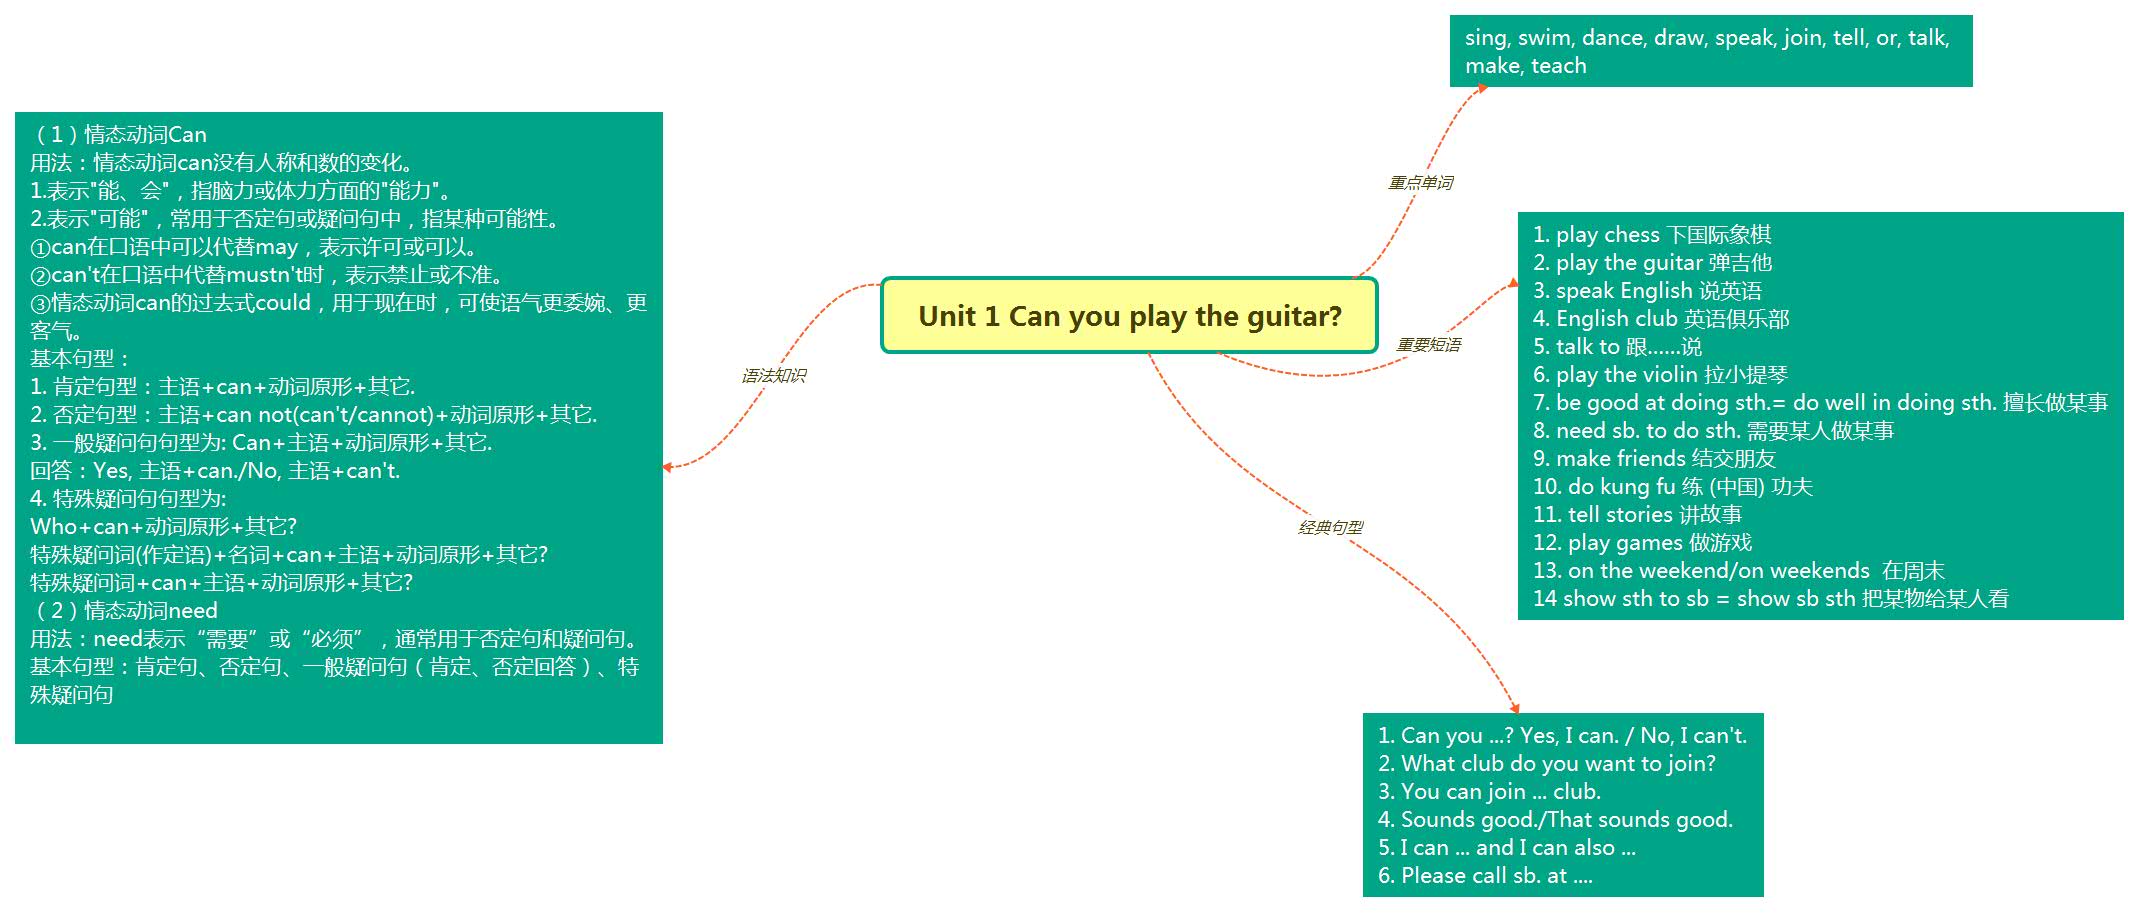 Unit 1 can you play the guitar .jpg